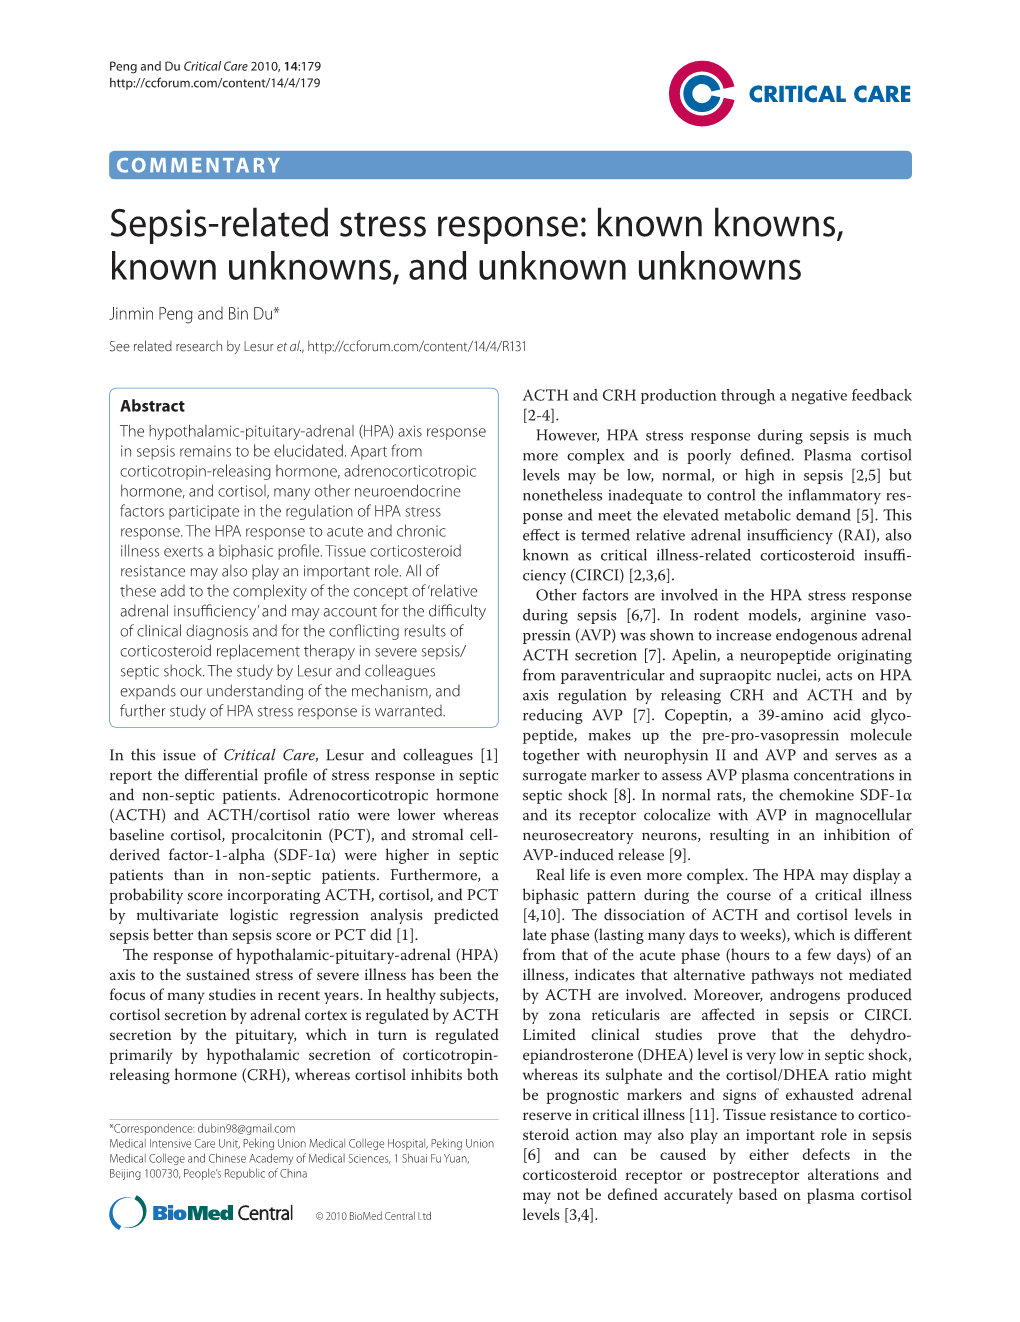 Sepsis-Related Stress Response: Known Knowns, Known Unknowns, and Unknown Unknowns Jinmin Peng and Bin Du*